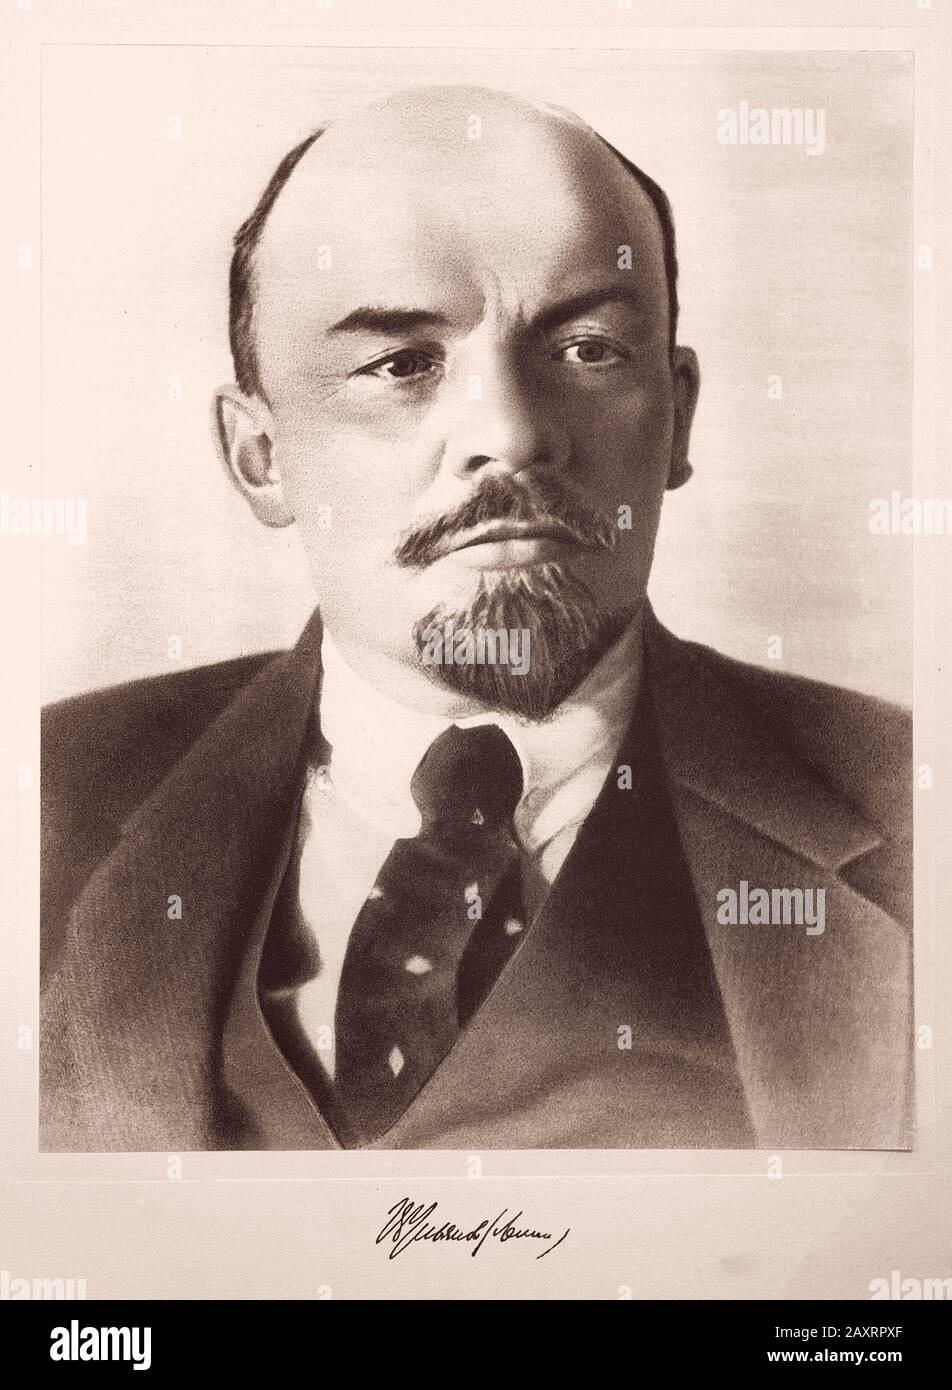 Vladimir Ilyich Ulyanov (1870 – 1924), better known by his alias Lenin, was a Russian revolutionary, politician, and political theorist. He served as Stock Photo